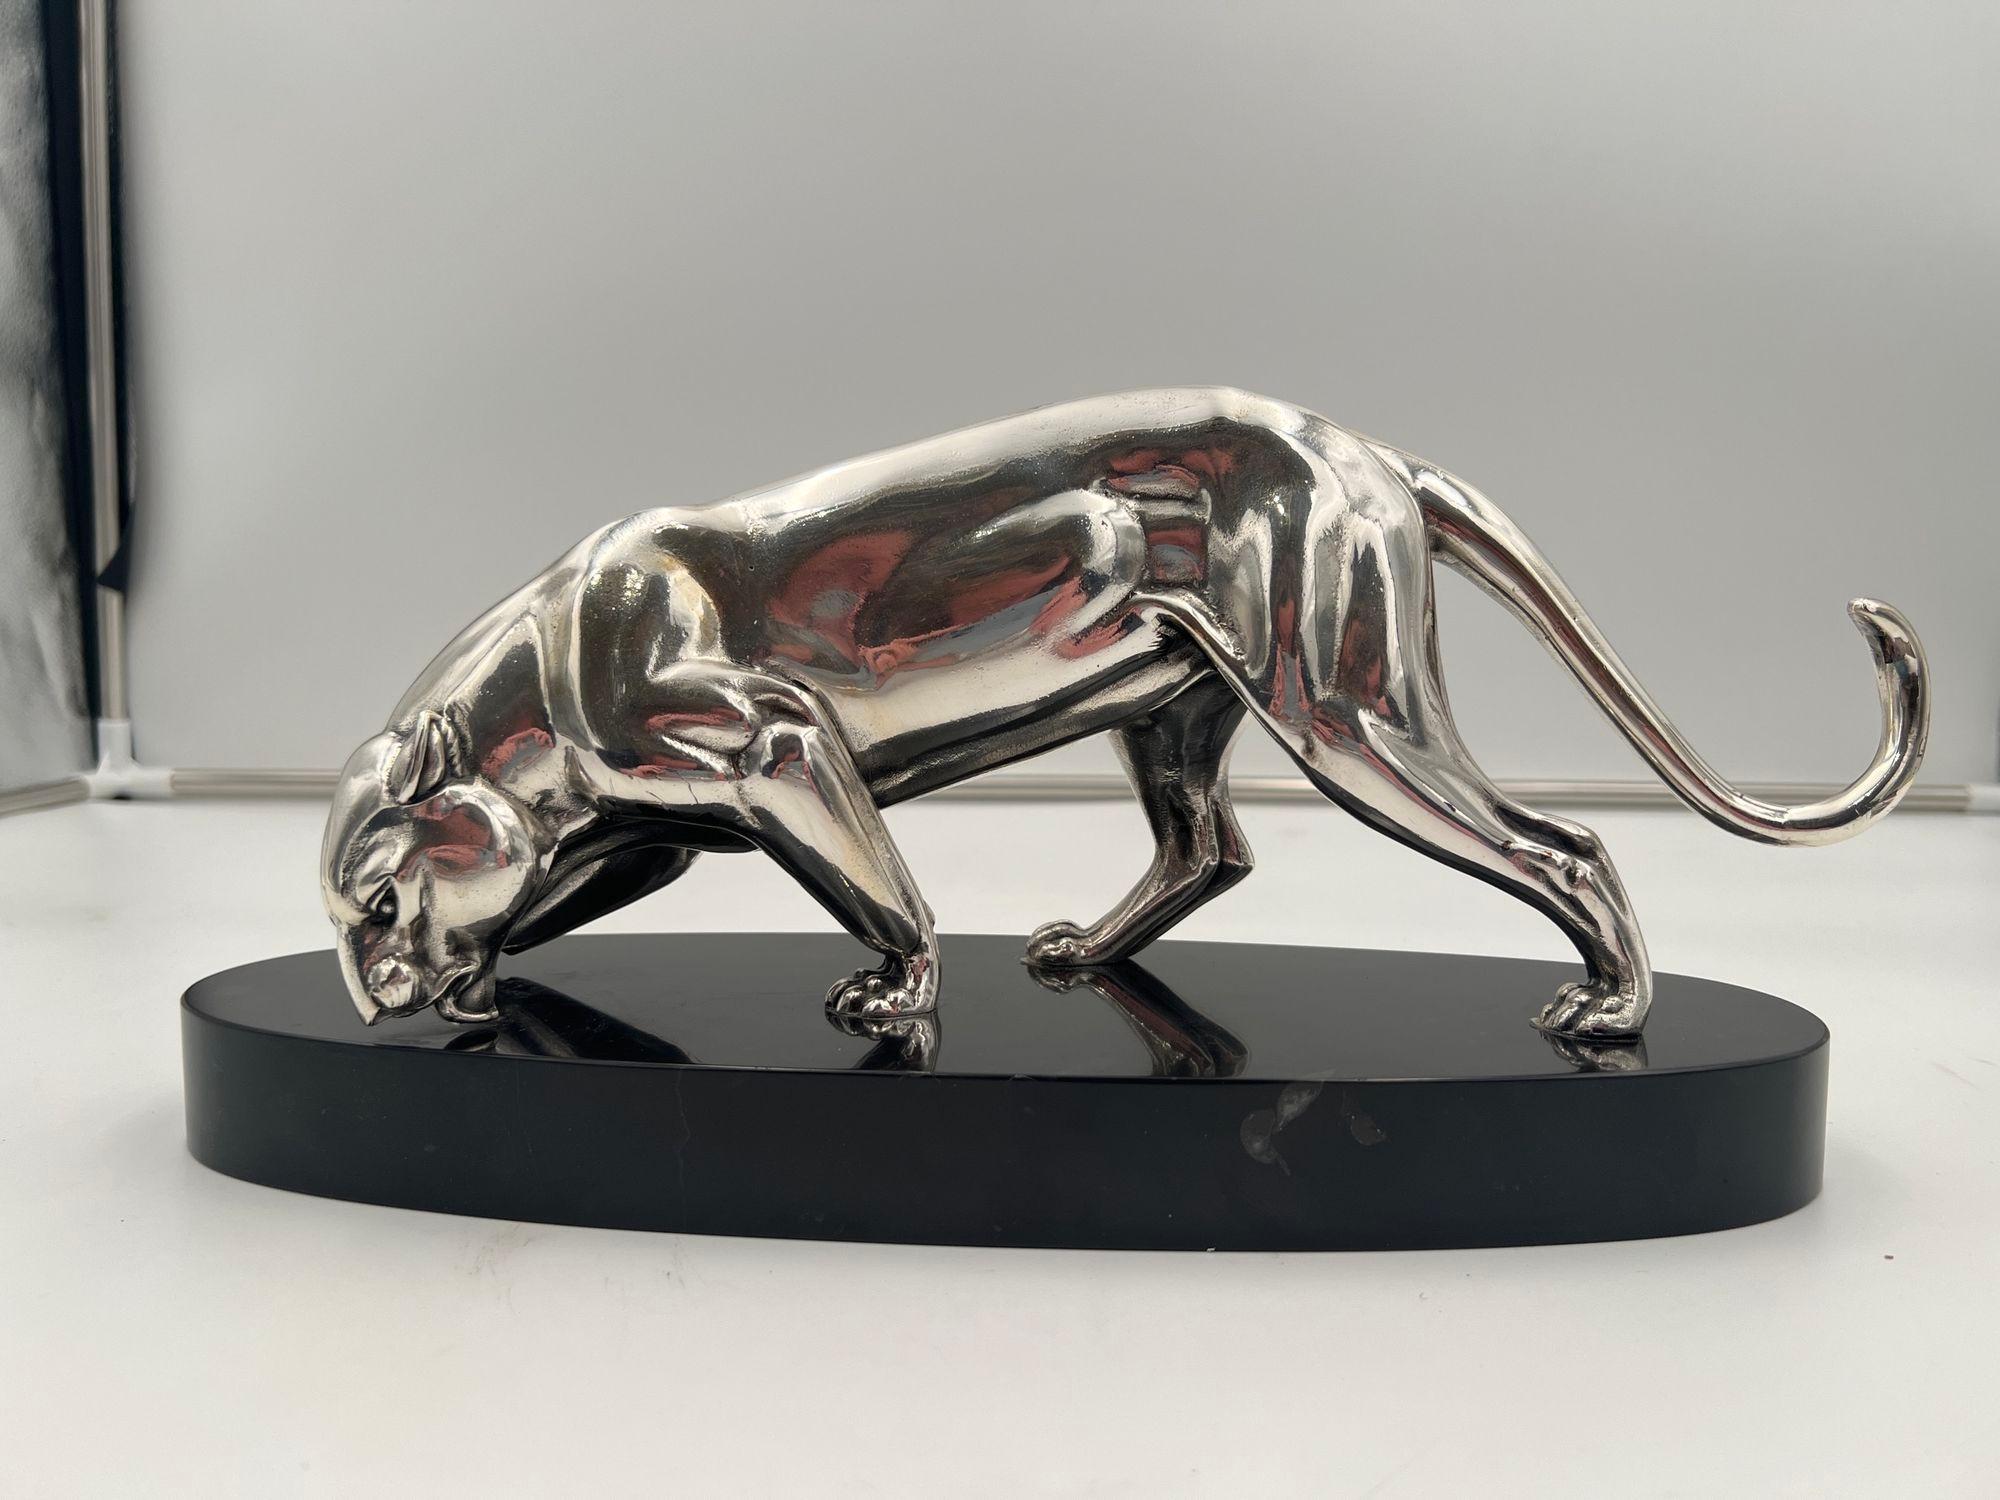 Beautiful small Art Deco panther sculpture from France around 1930.
Silver-plated cast pewter. Standing on an oval stone plinth.
Dimensions: H 17 cm x W 34.5 cm x D 11 cm